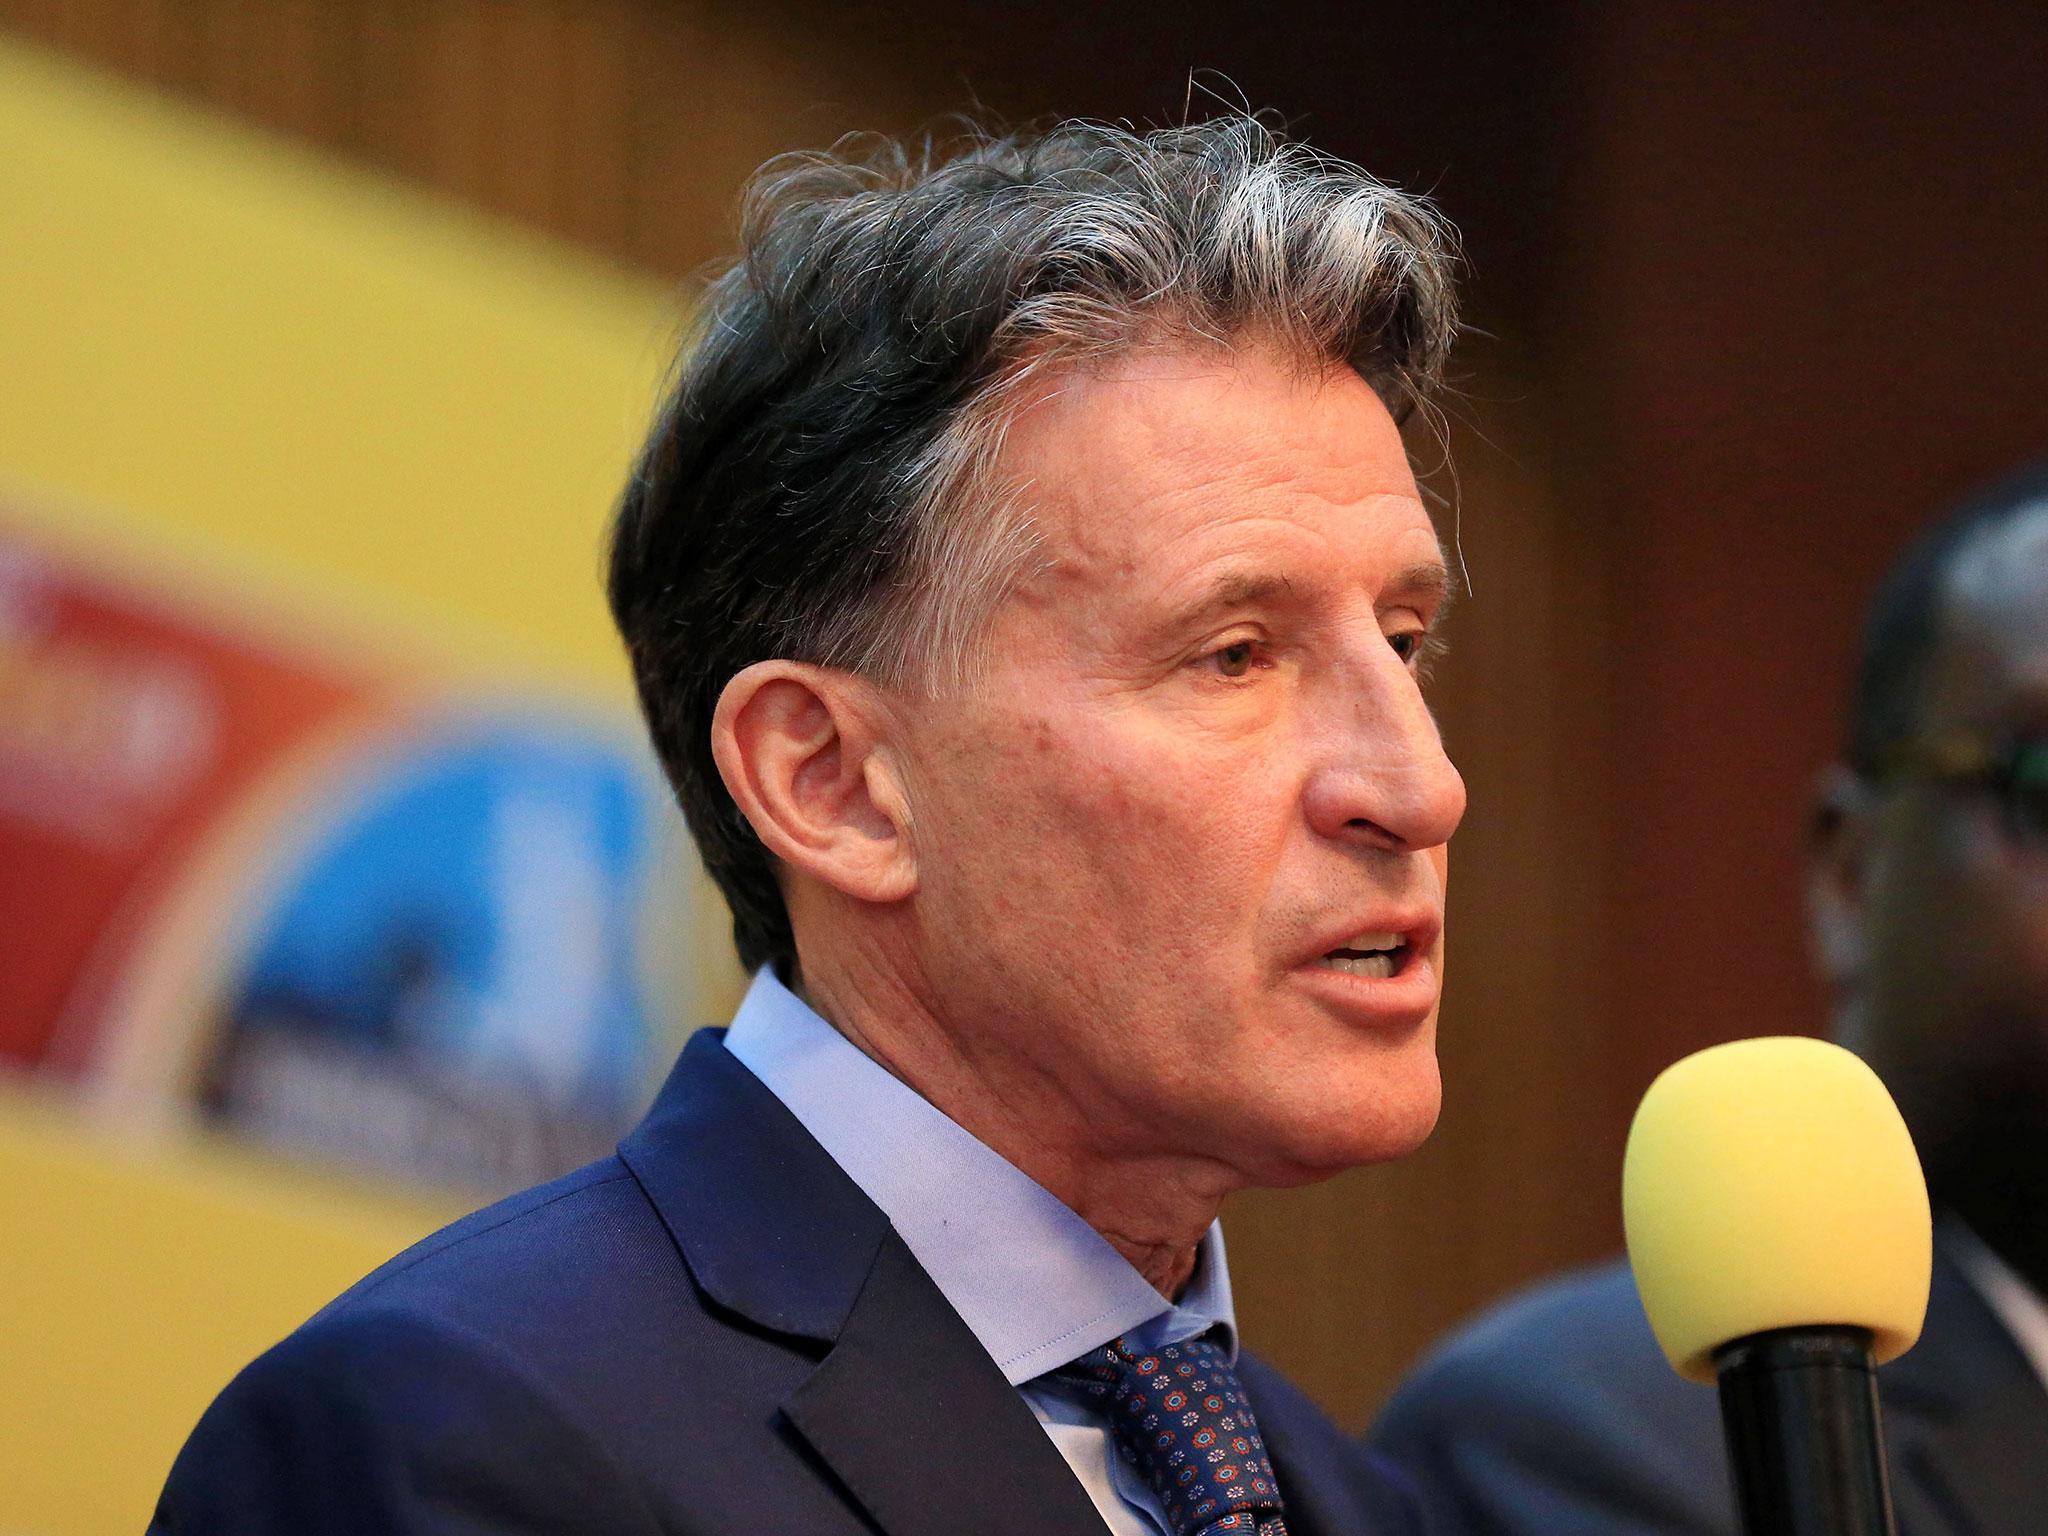 Coe did insist that anti-doping efforts have improved massively though